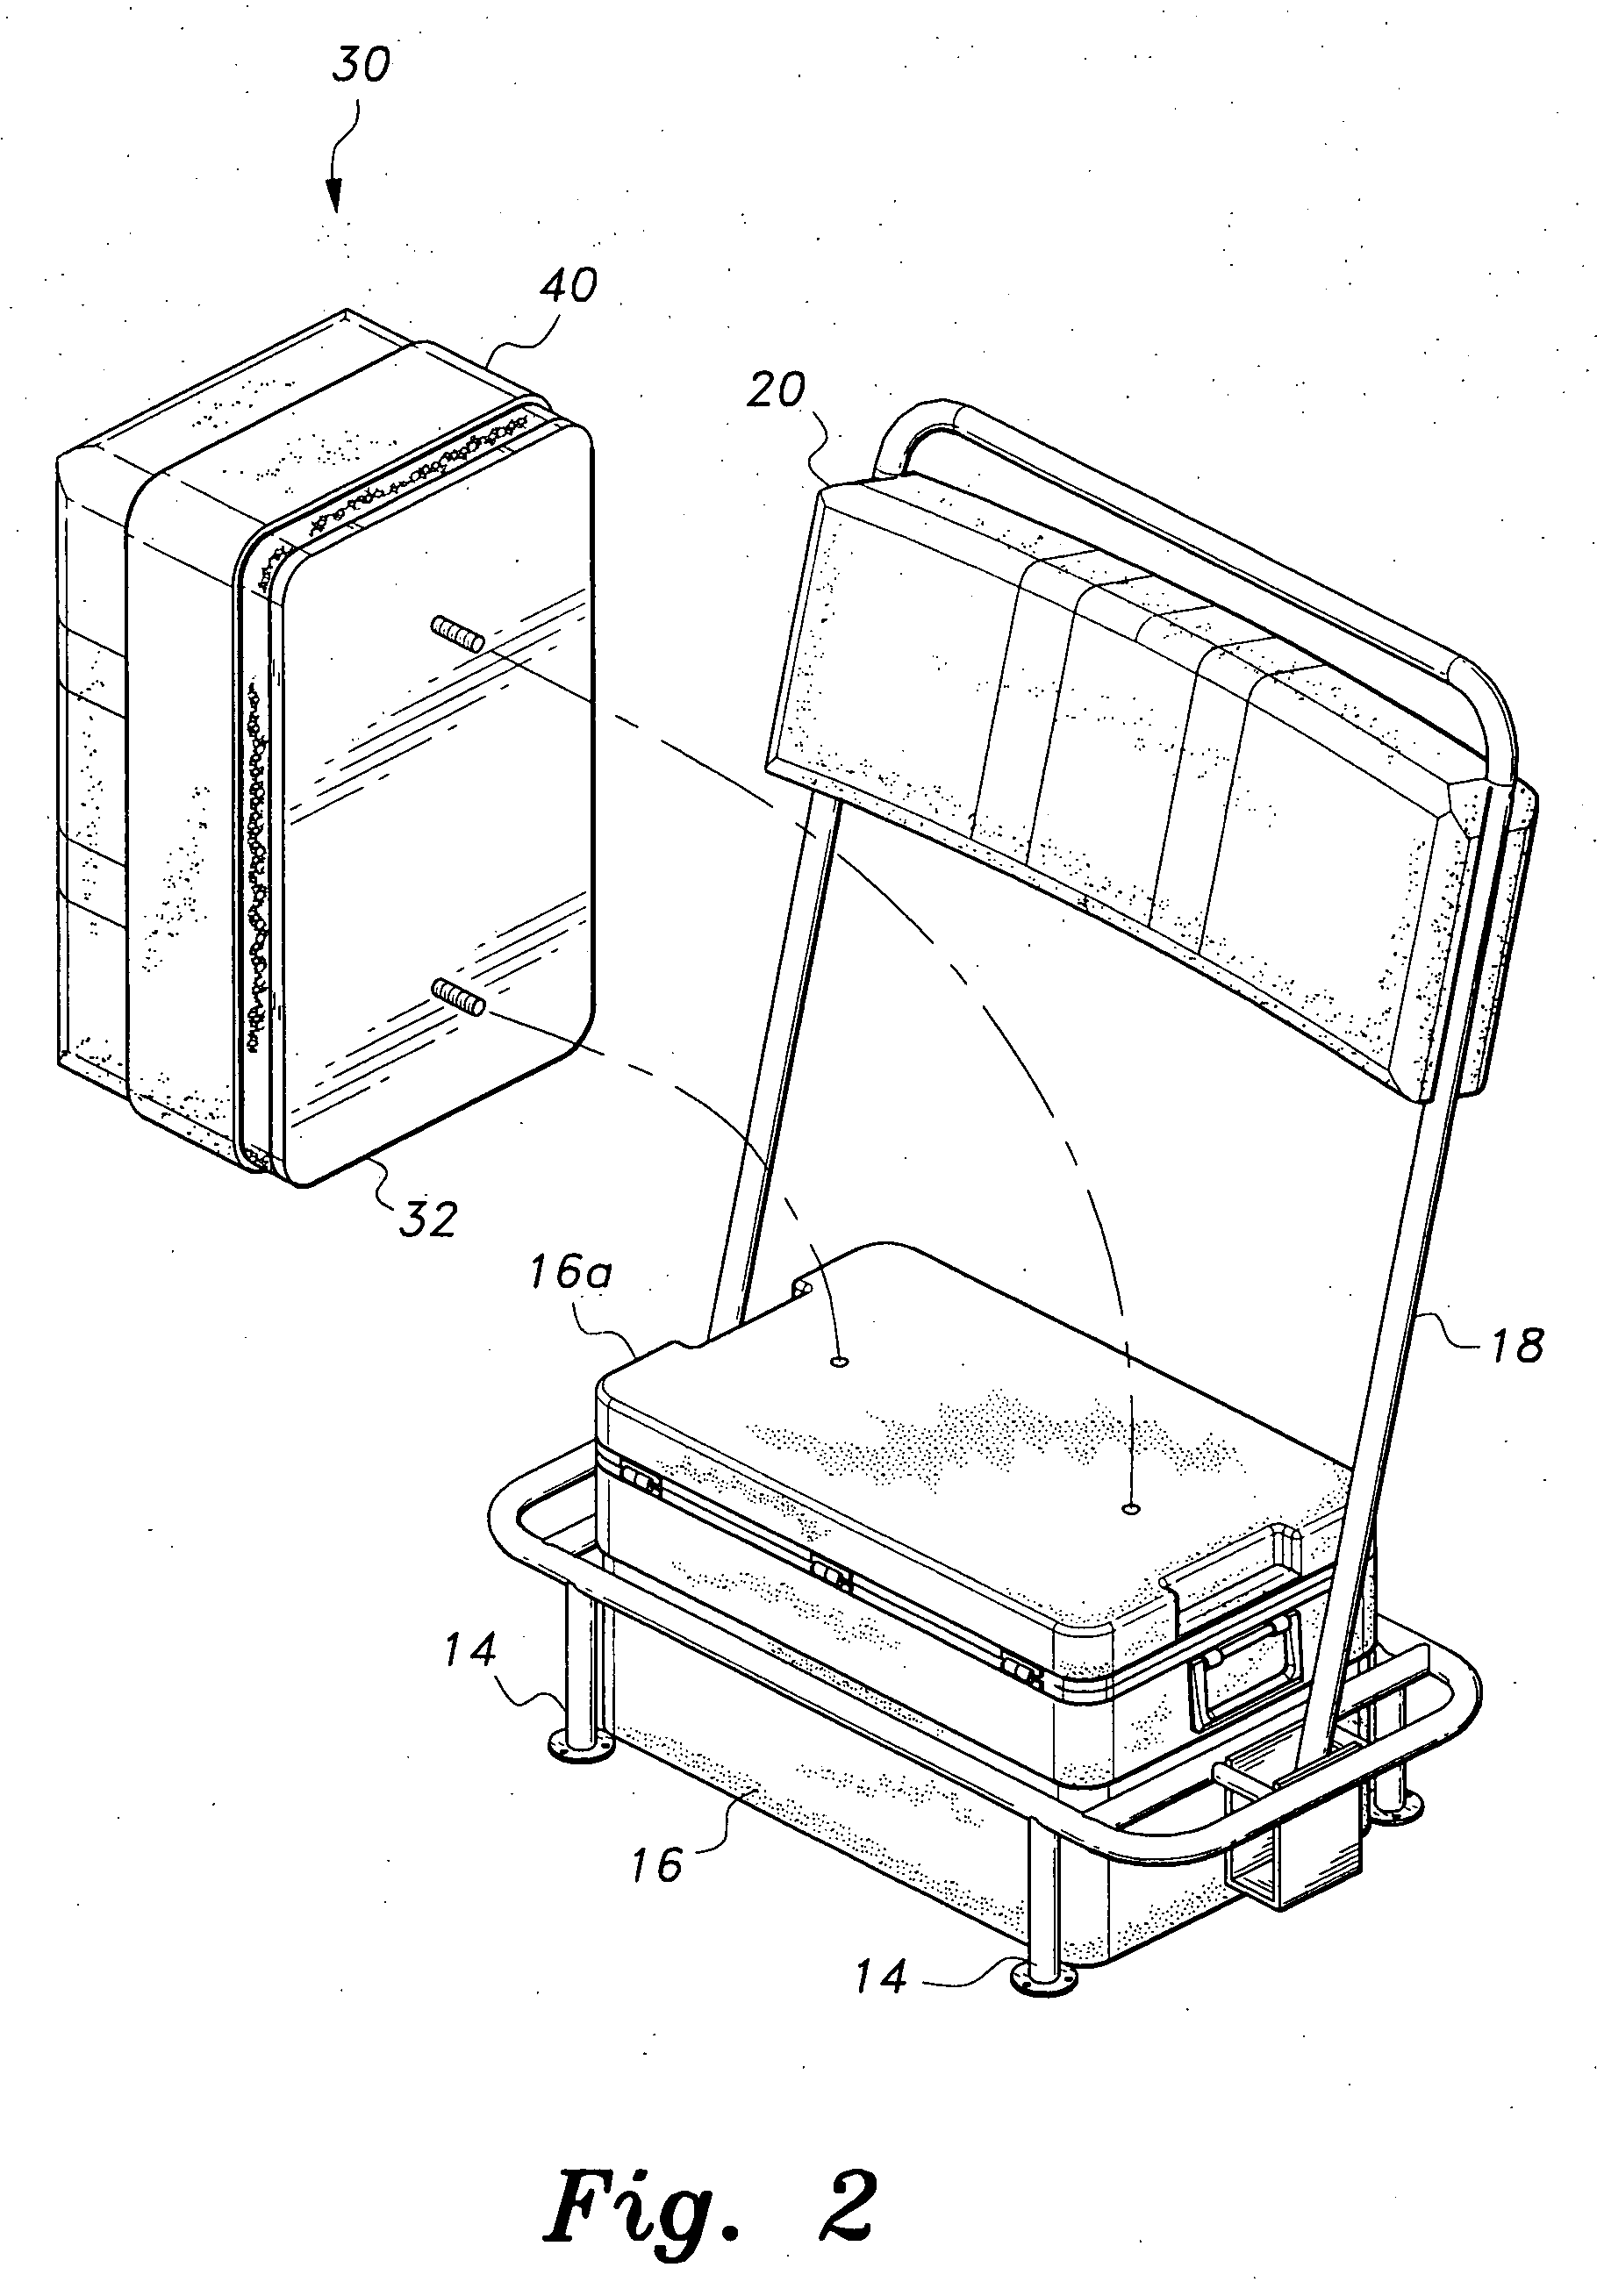 Combination cooler and seat system